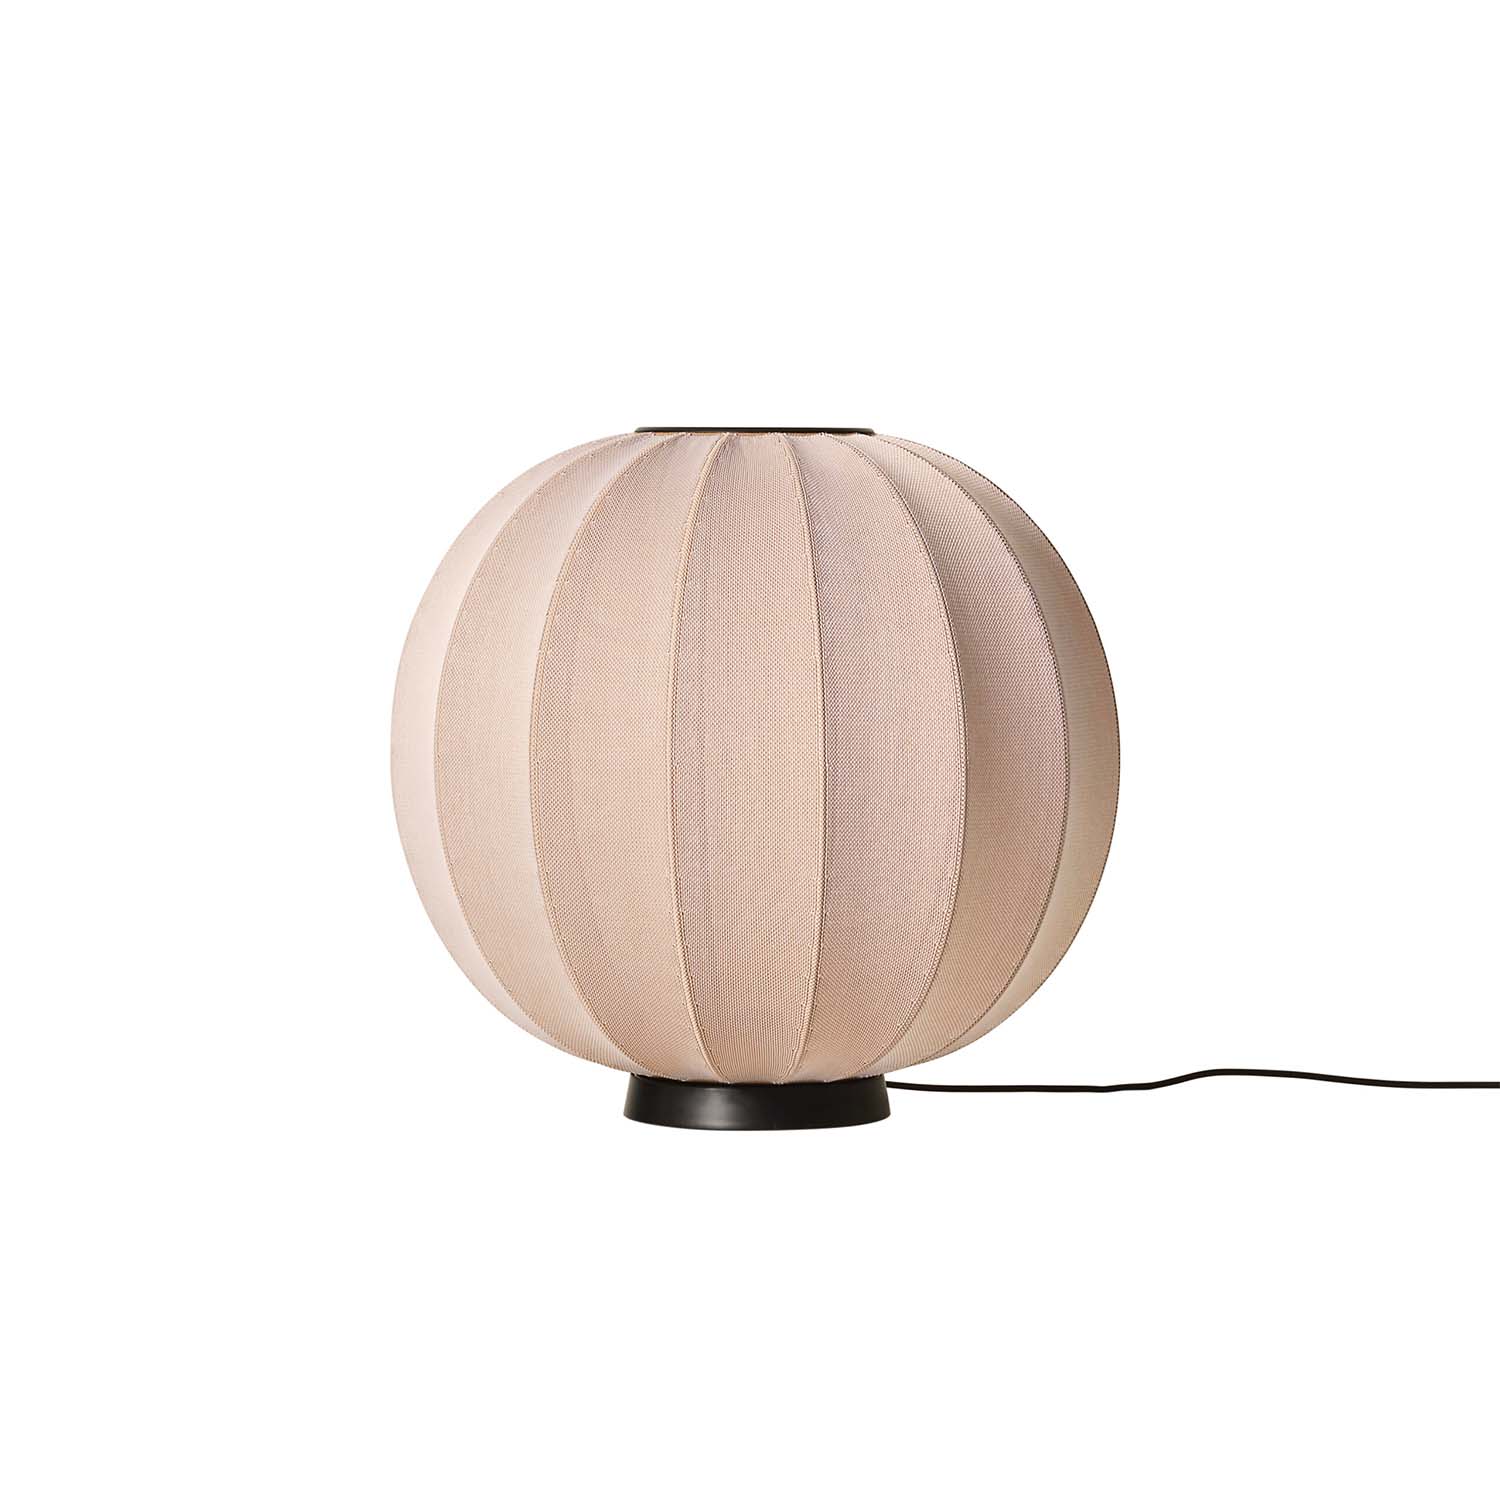 KNIT-WIT - Woven Japanese Oval Pumpkin Table Lamp